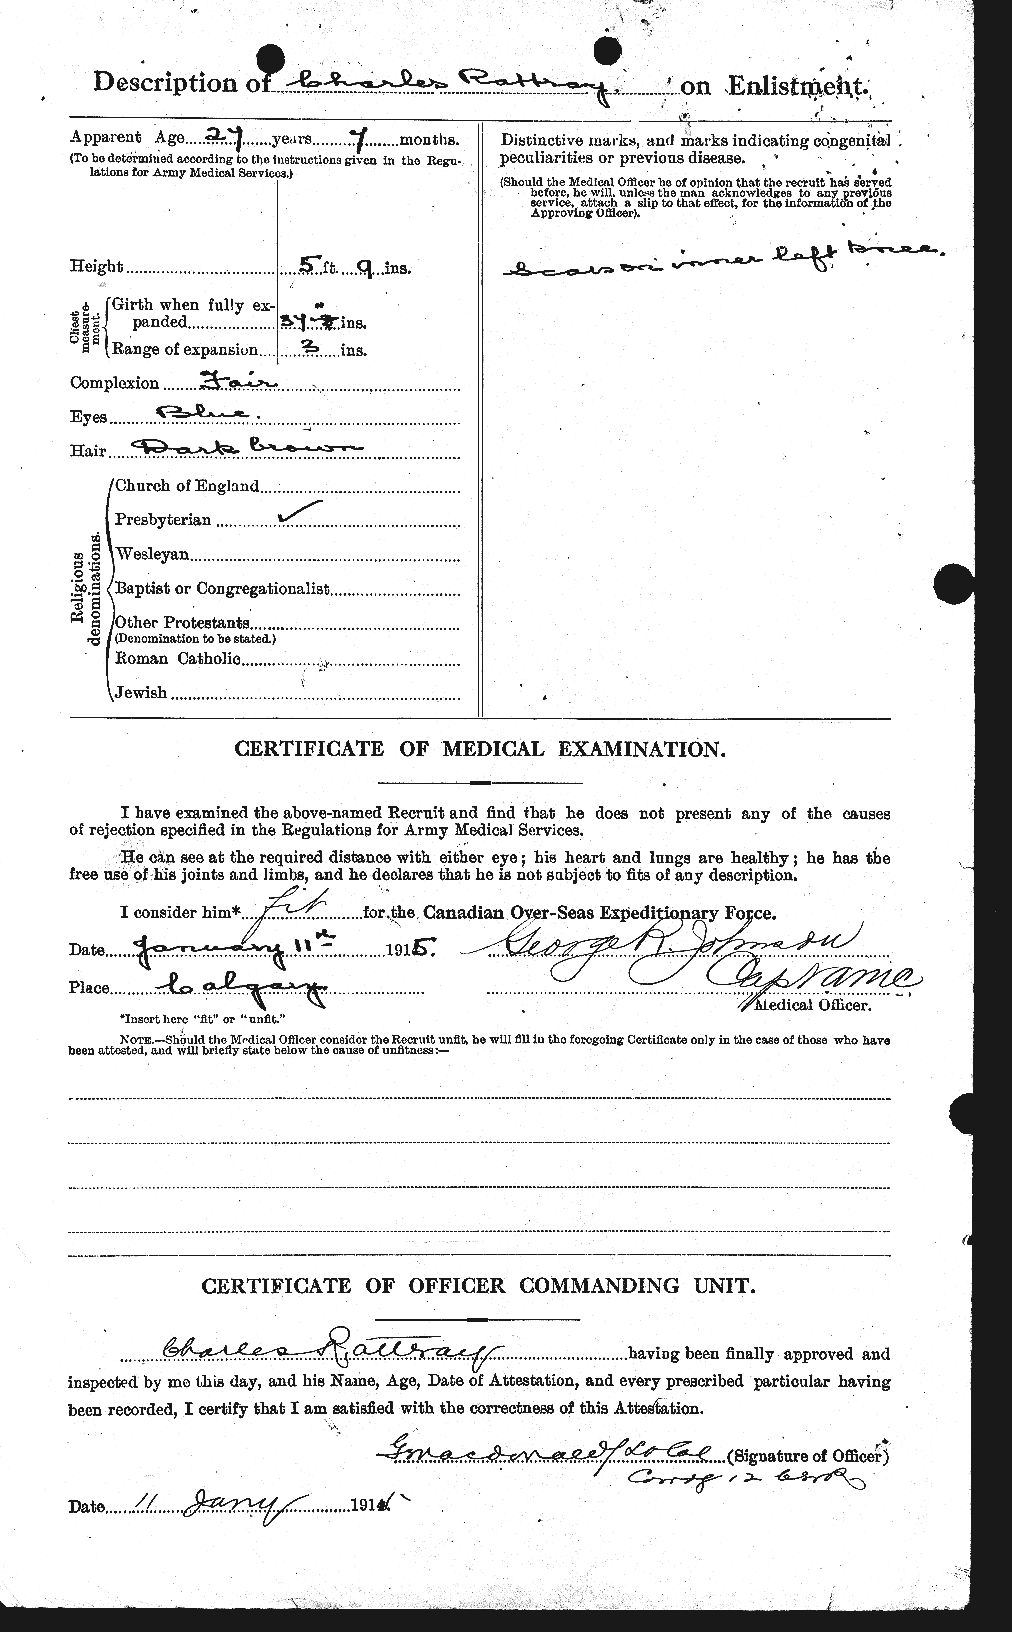 Personnel Records of the First World War - CEF 595694b